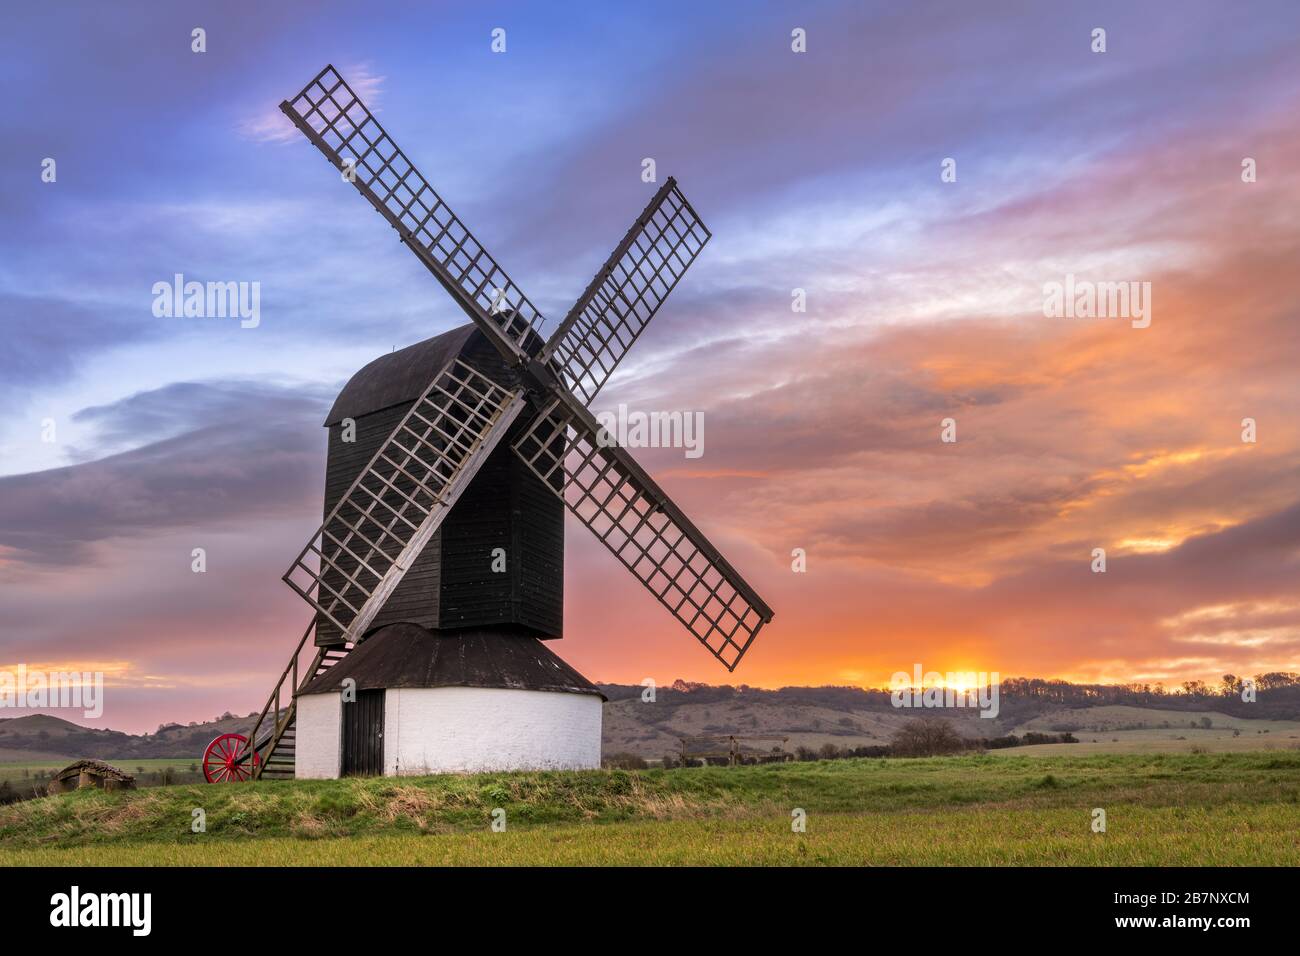 Ivinghoe, Buckinghamshire, England. Tuesday 17th March 2020. UK Weather. After a cold night, the dawn sky is spectacular over the Pitstone Windmill in Stock Photo